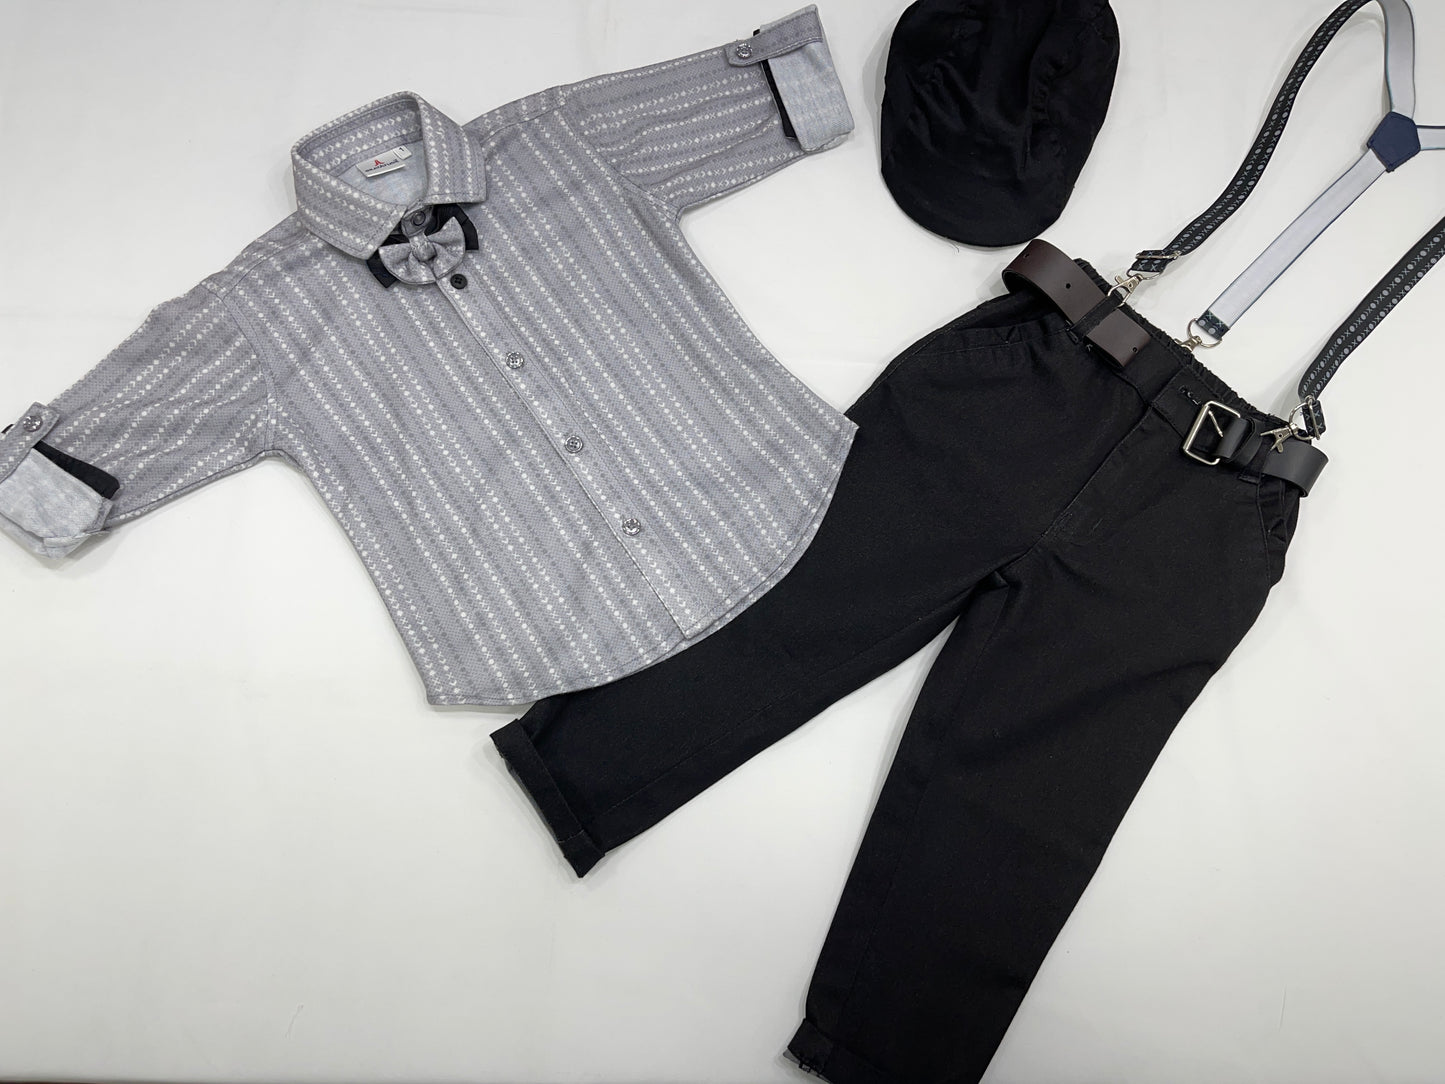 Grey Design Shirt with Dark Grey Pants Boys Set with stylish hat, bow-tie and suspenders